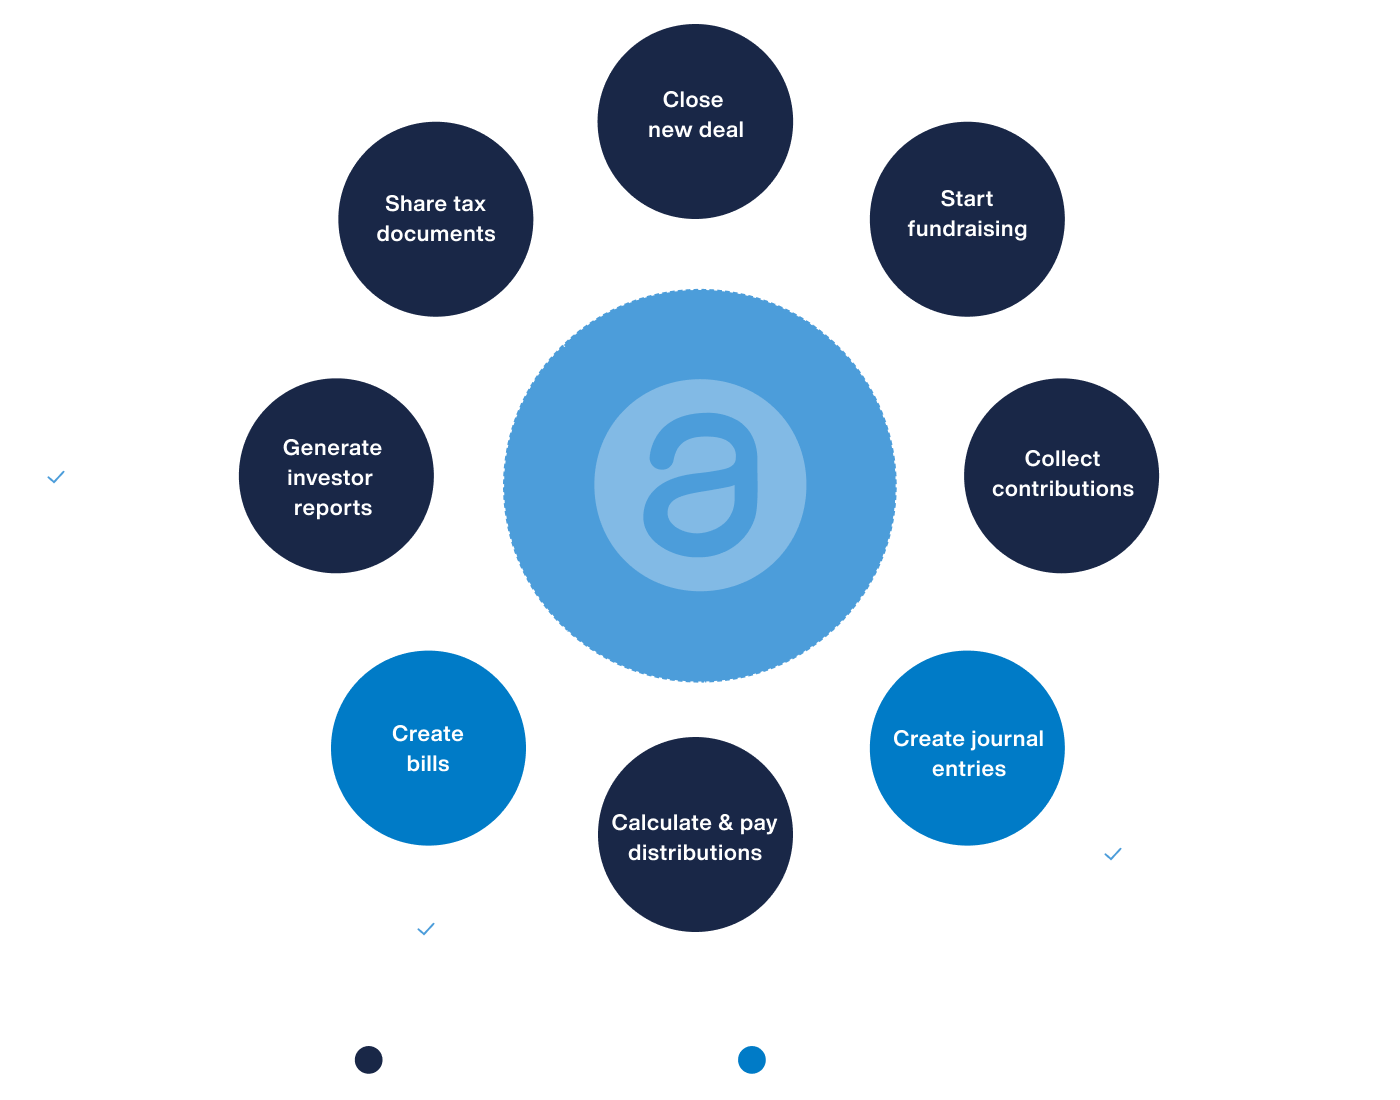 A circular flywheel overview chart of Appfolio Investment Management and Appfolio Property Manager features.